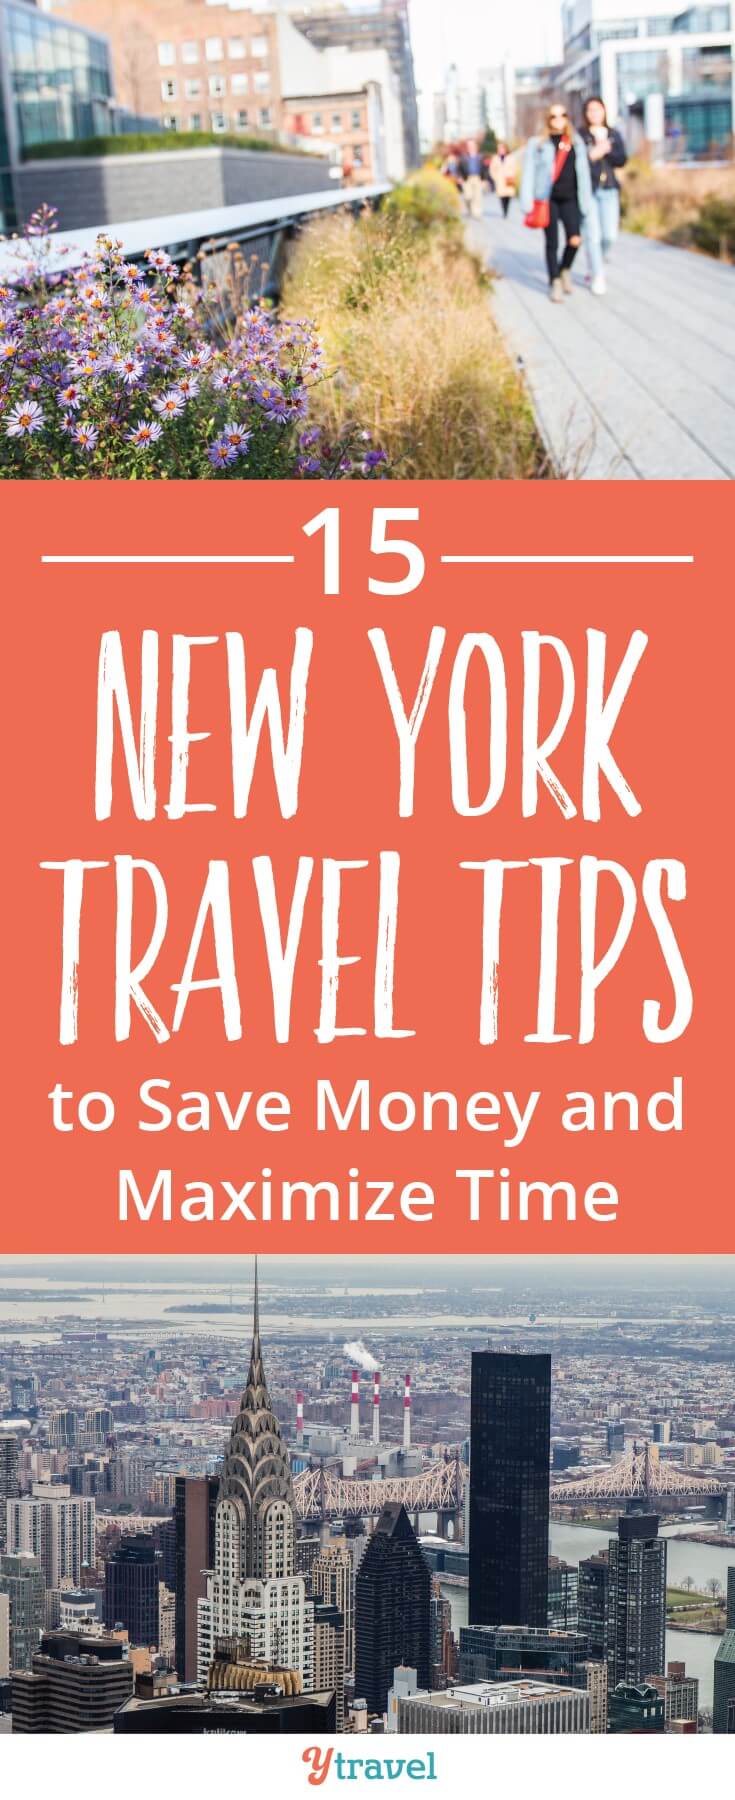 New york travel tips to save you money and maximise your time on your visit to NYC including tips on finding cheap food, saving on accommodation, and some great sightseeing tips